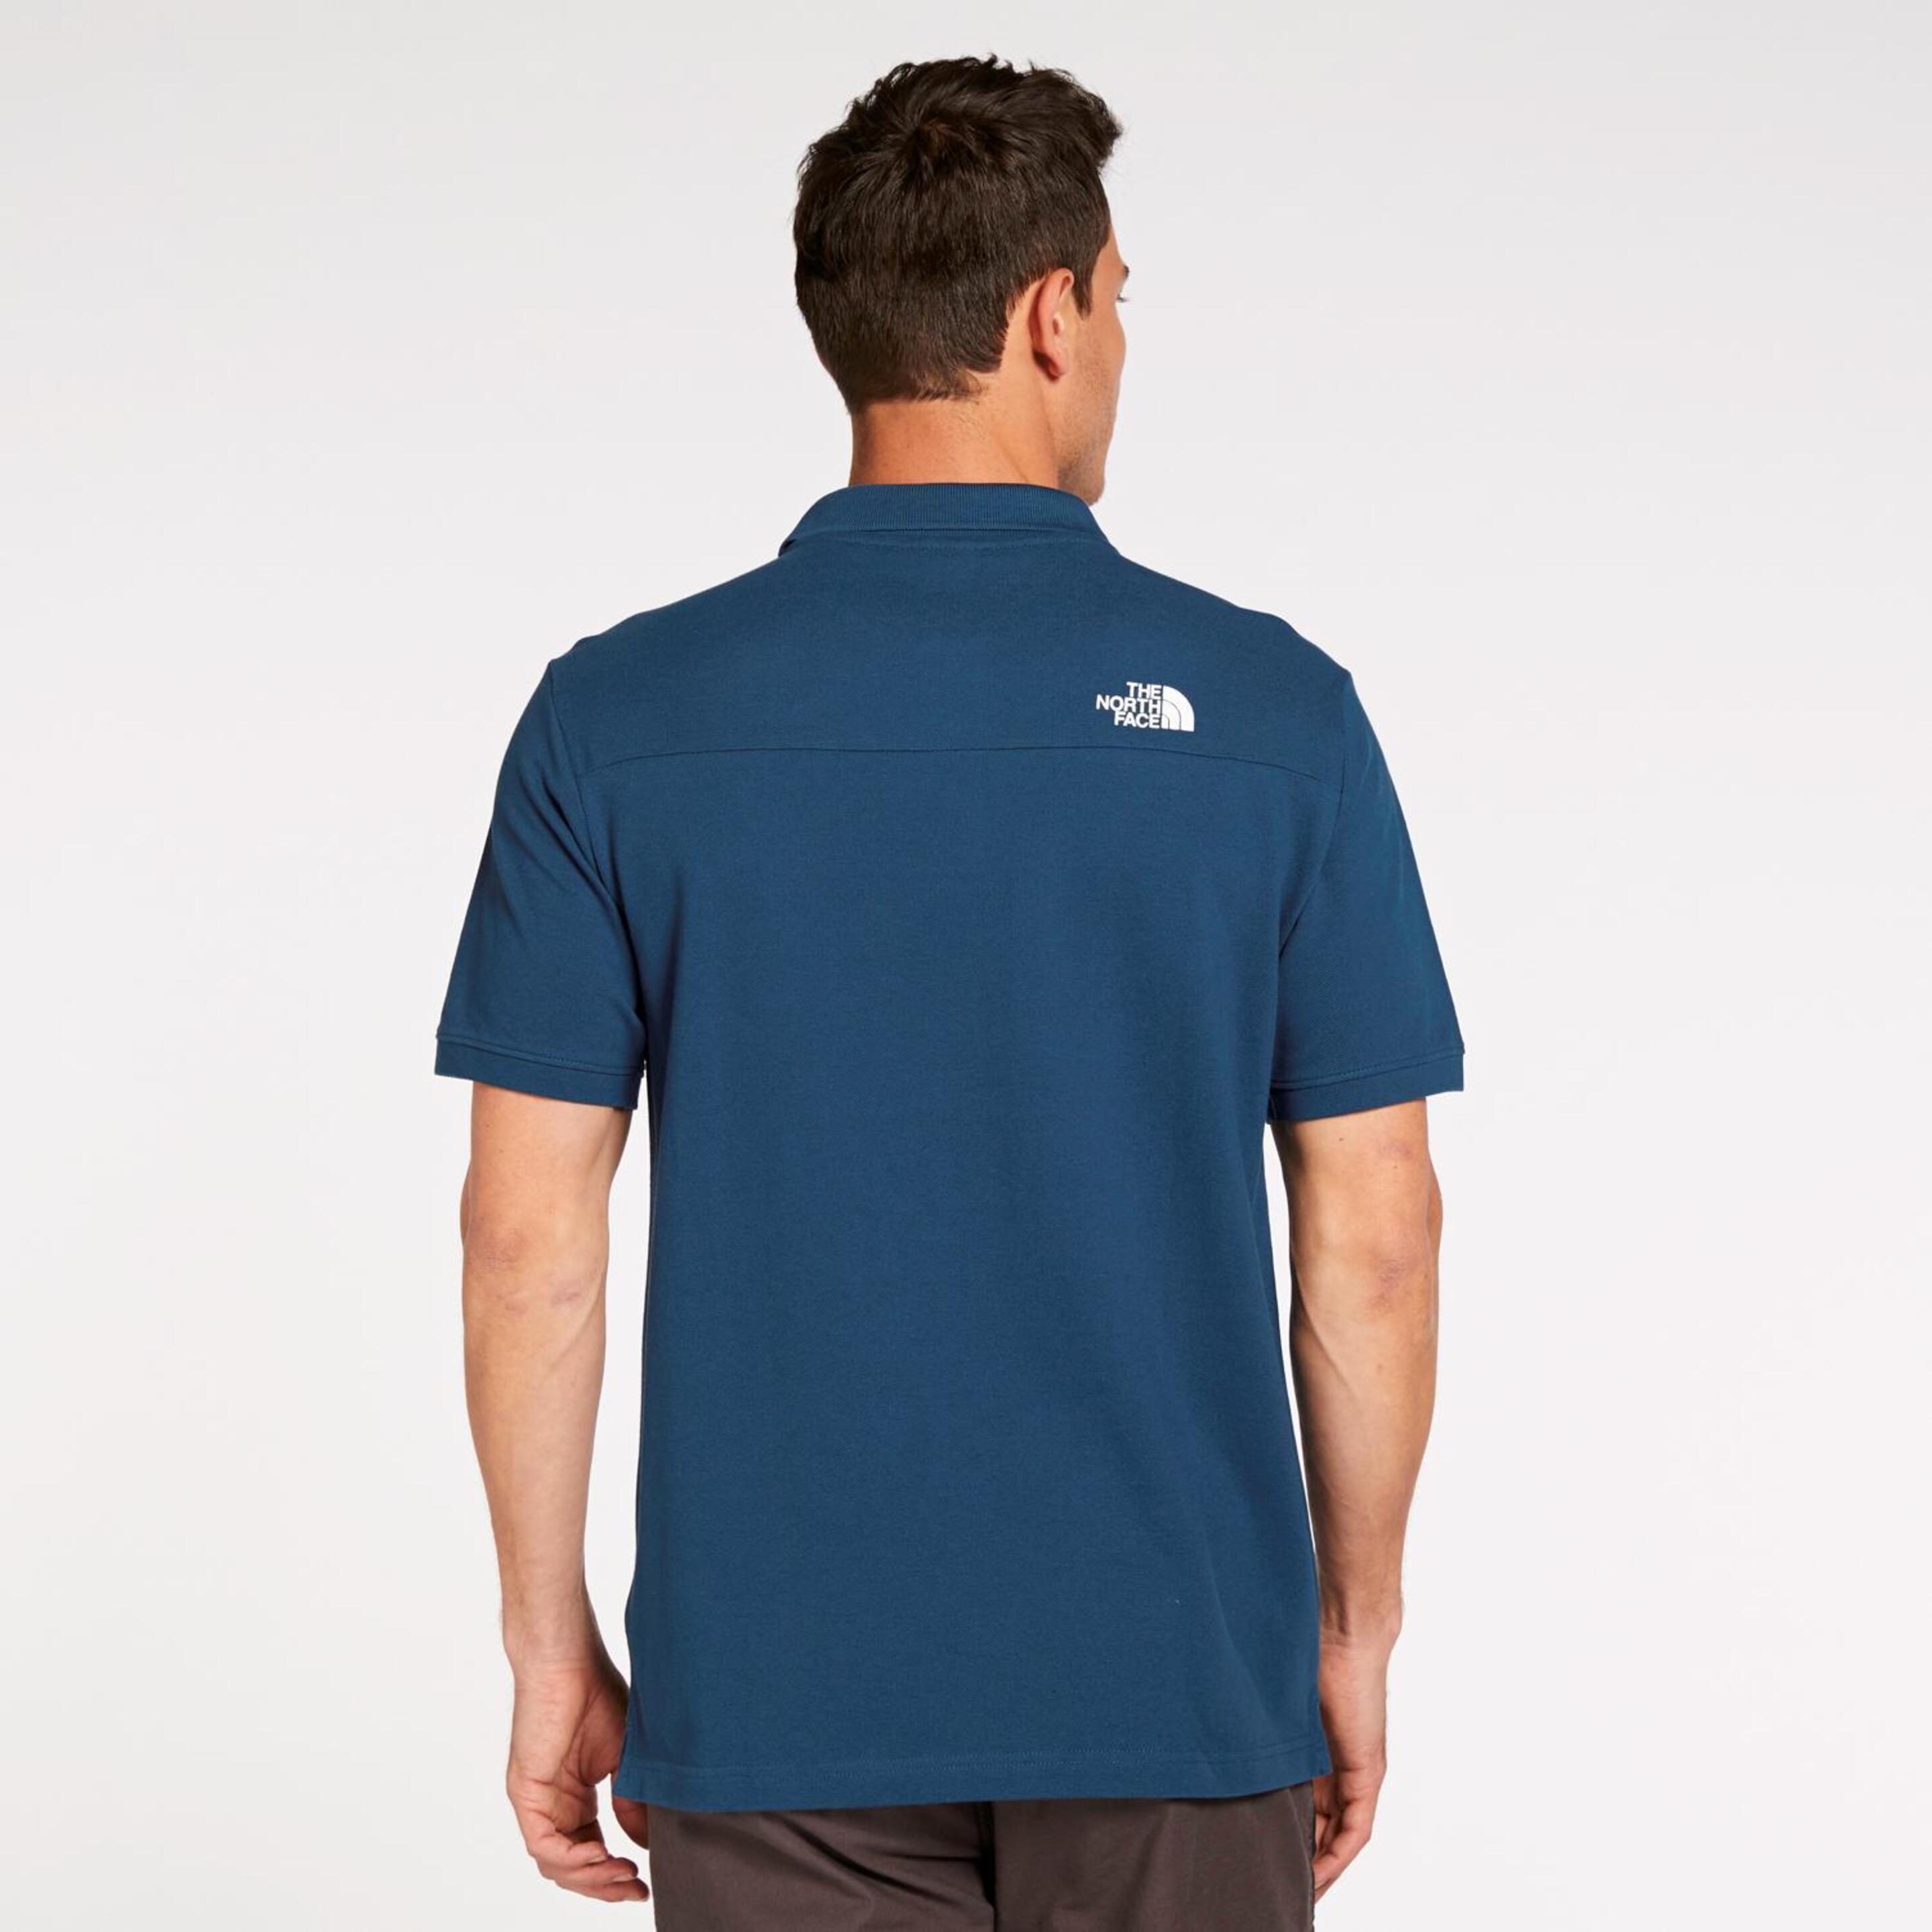 The North Face Calpine